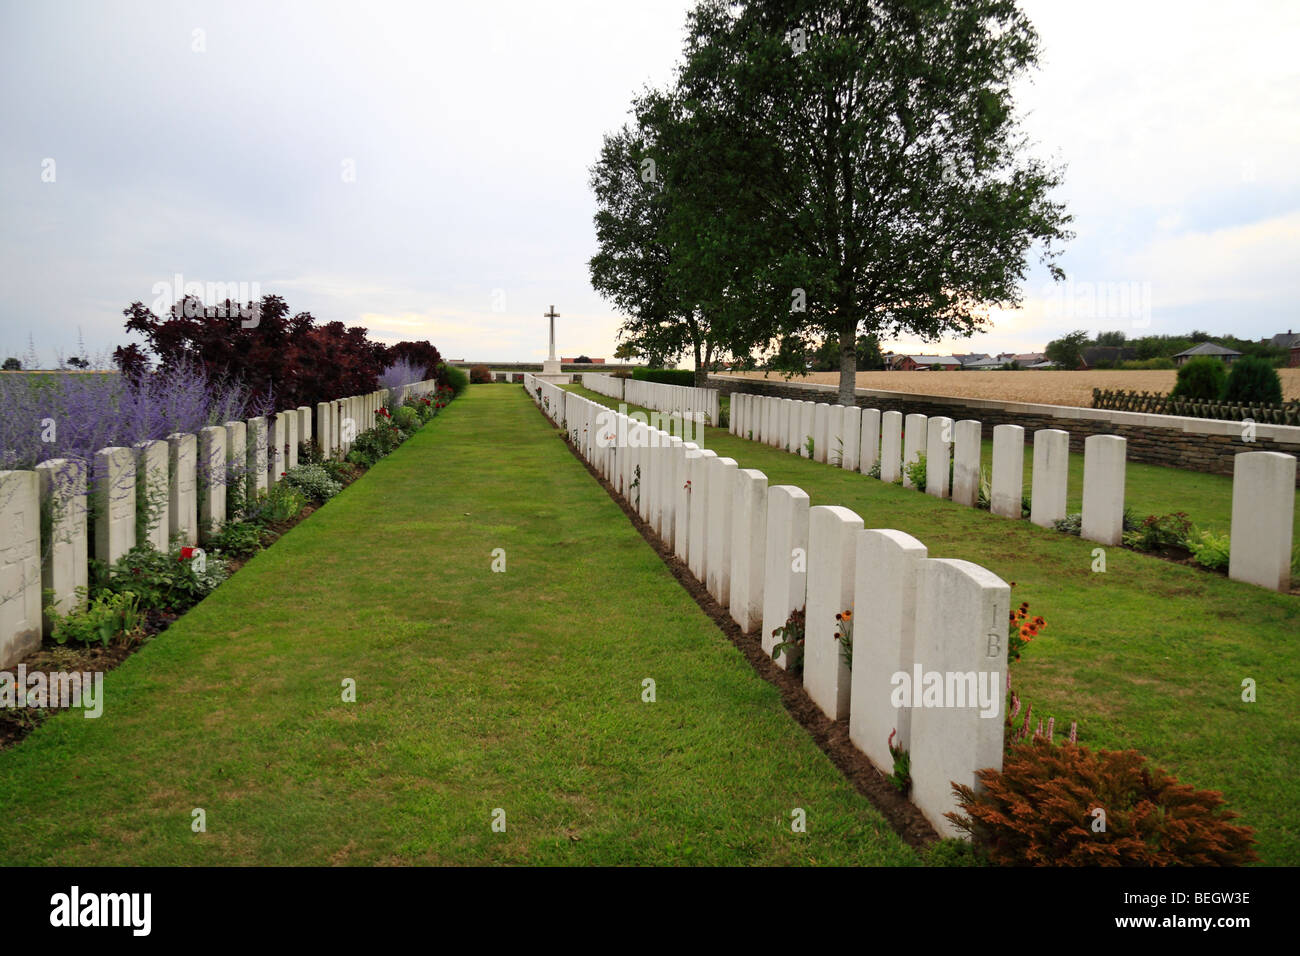 Lines of headstones in the Locre Hospice Commonwealth War Graves Commission Cemetery (CWGC) near Loker, Ieper, Belgium. Stock Photo